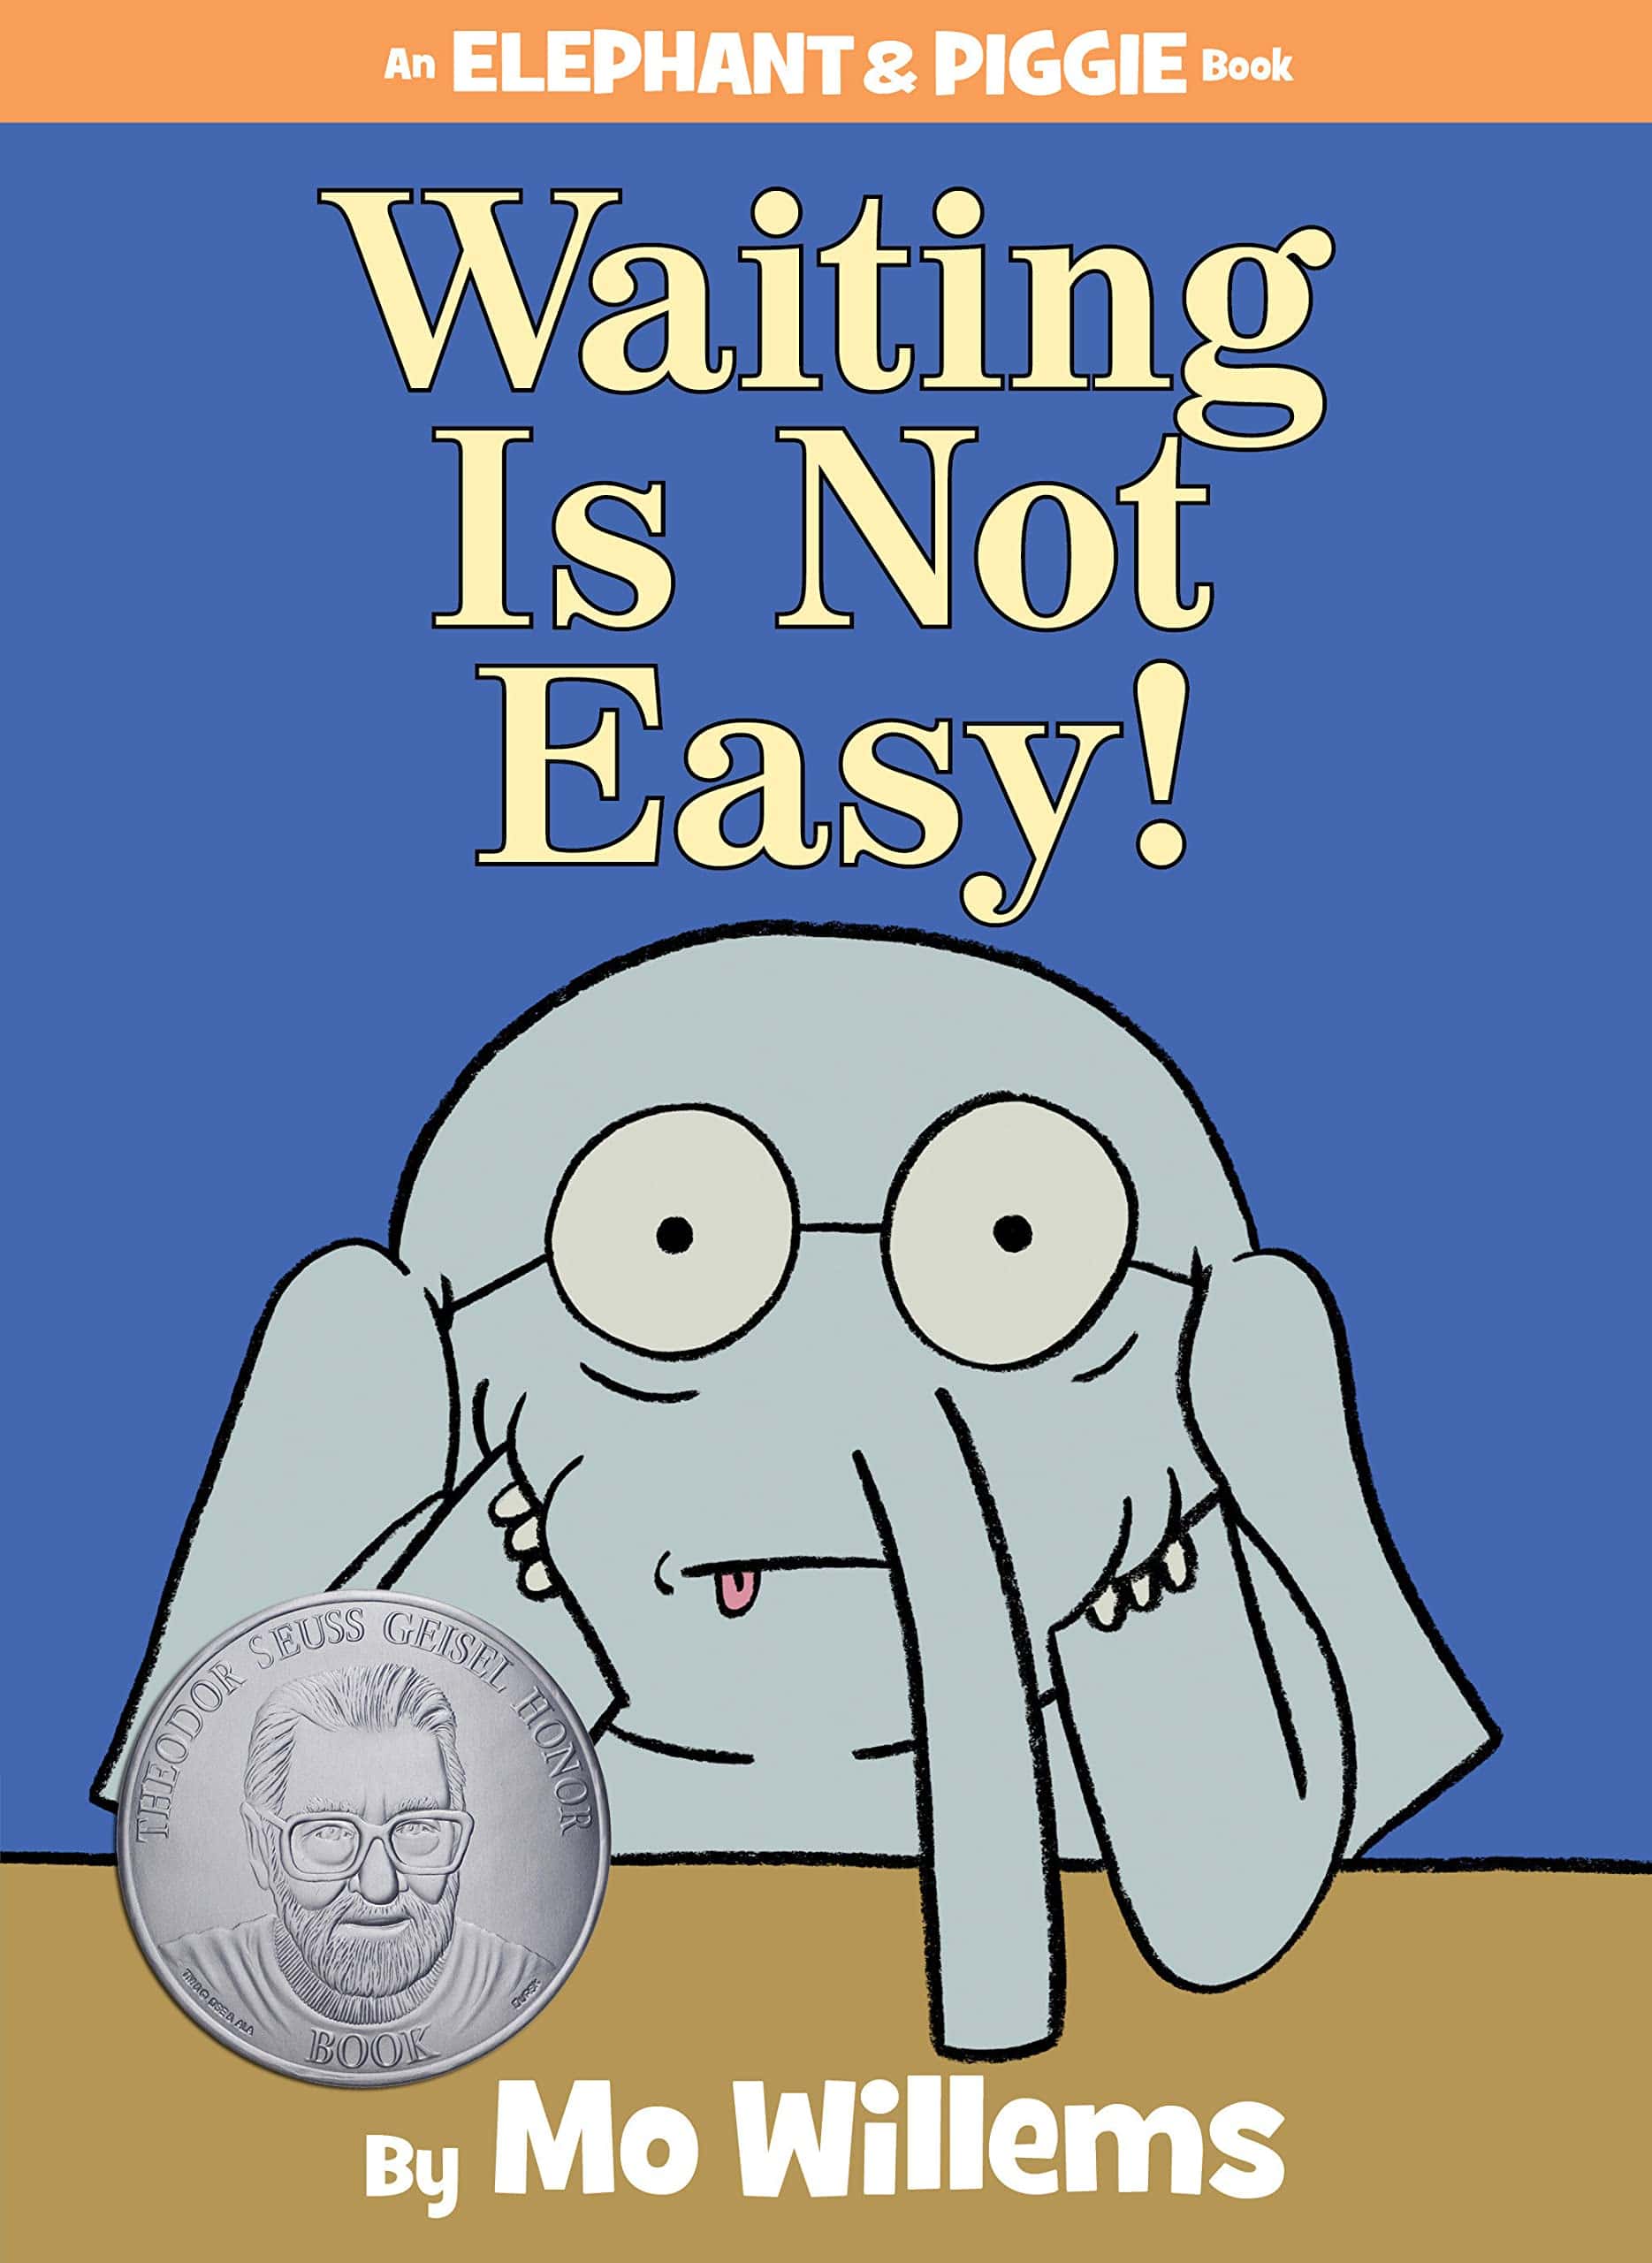 "Waiting Is Not Easy!" by Mo Willems